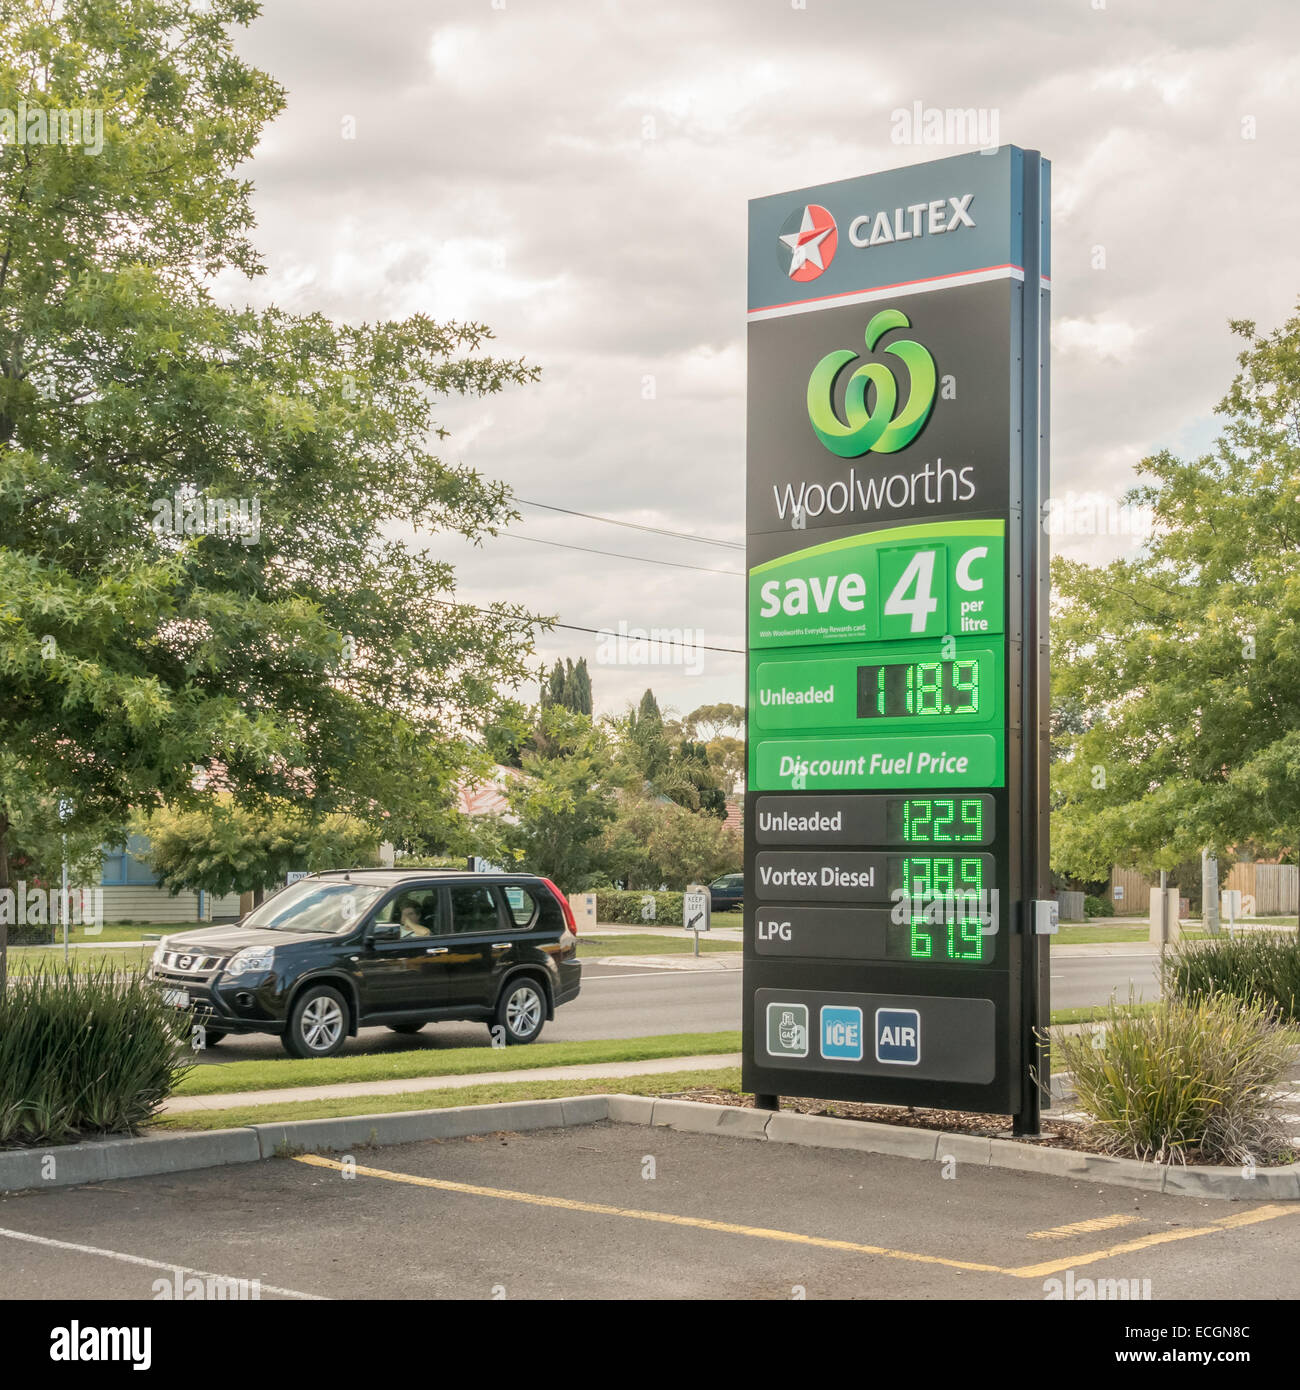 Fuel pricing sign at a Caltex/Woolworts branded service station Stock Photo